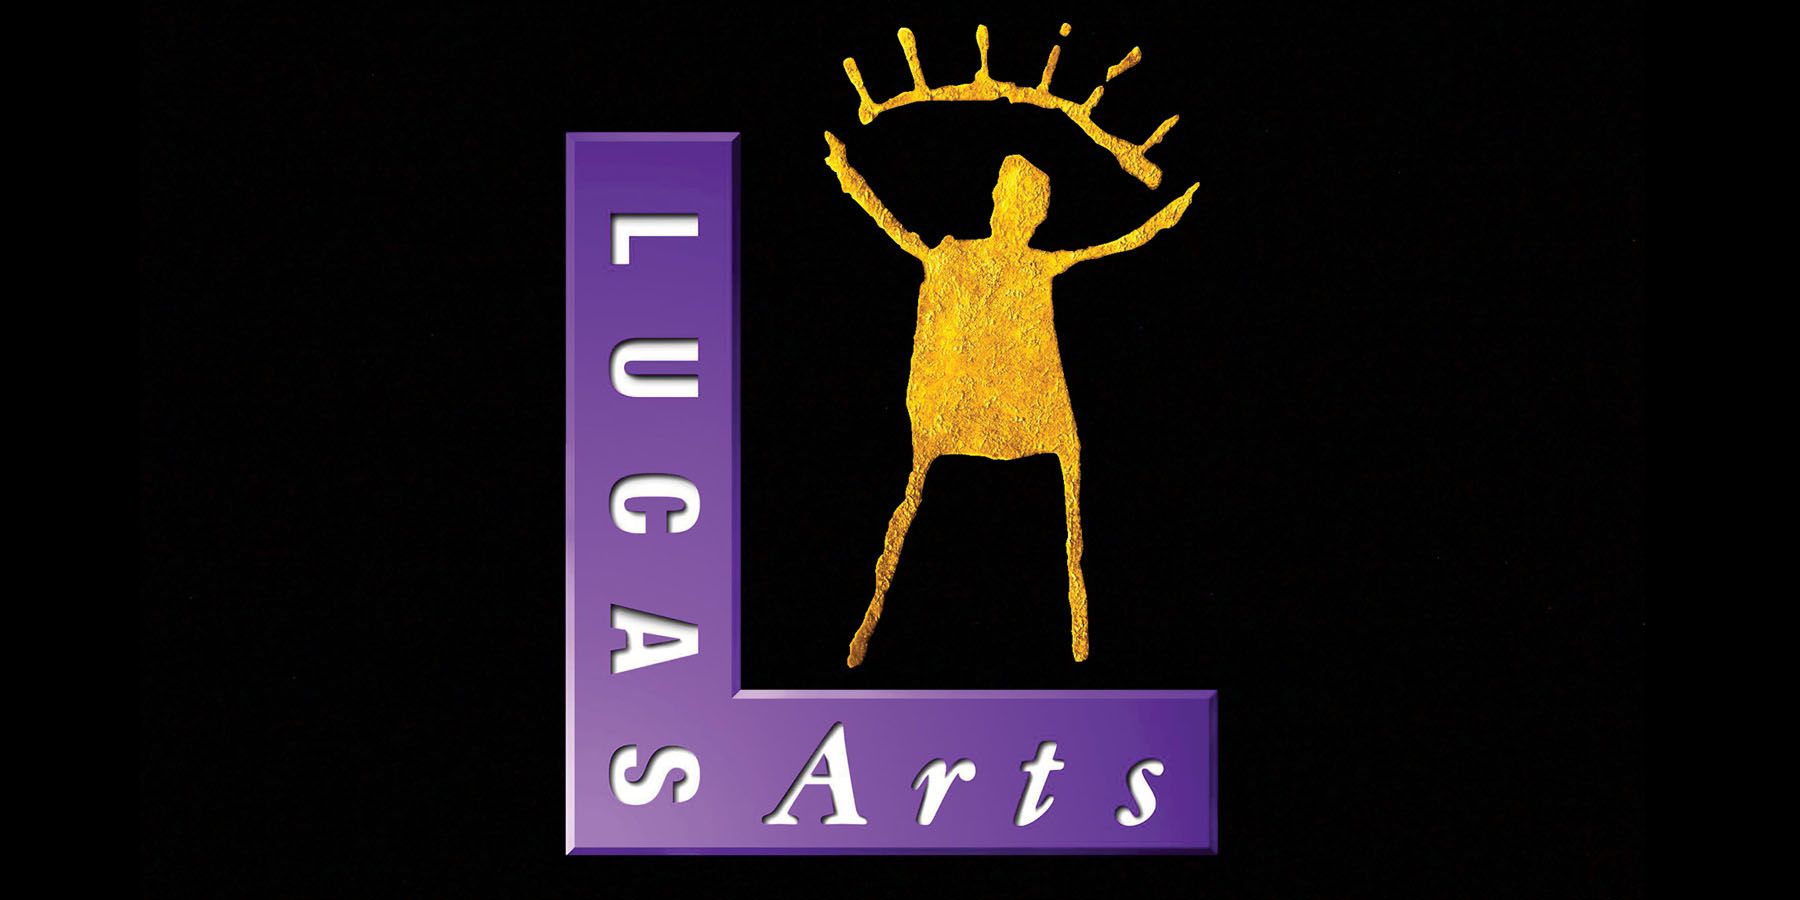 An image of the old LucasArts logo against a black background.